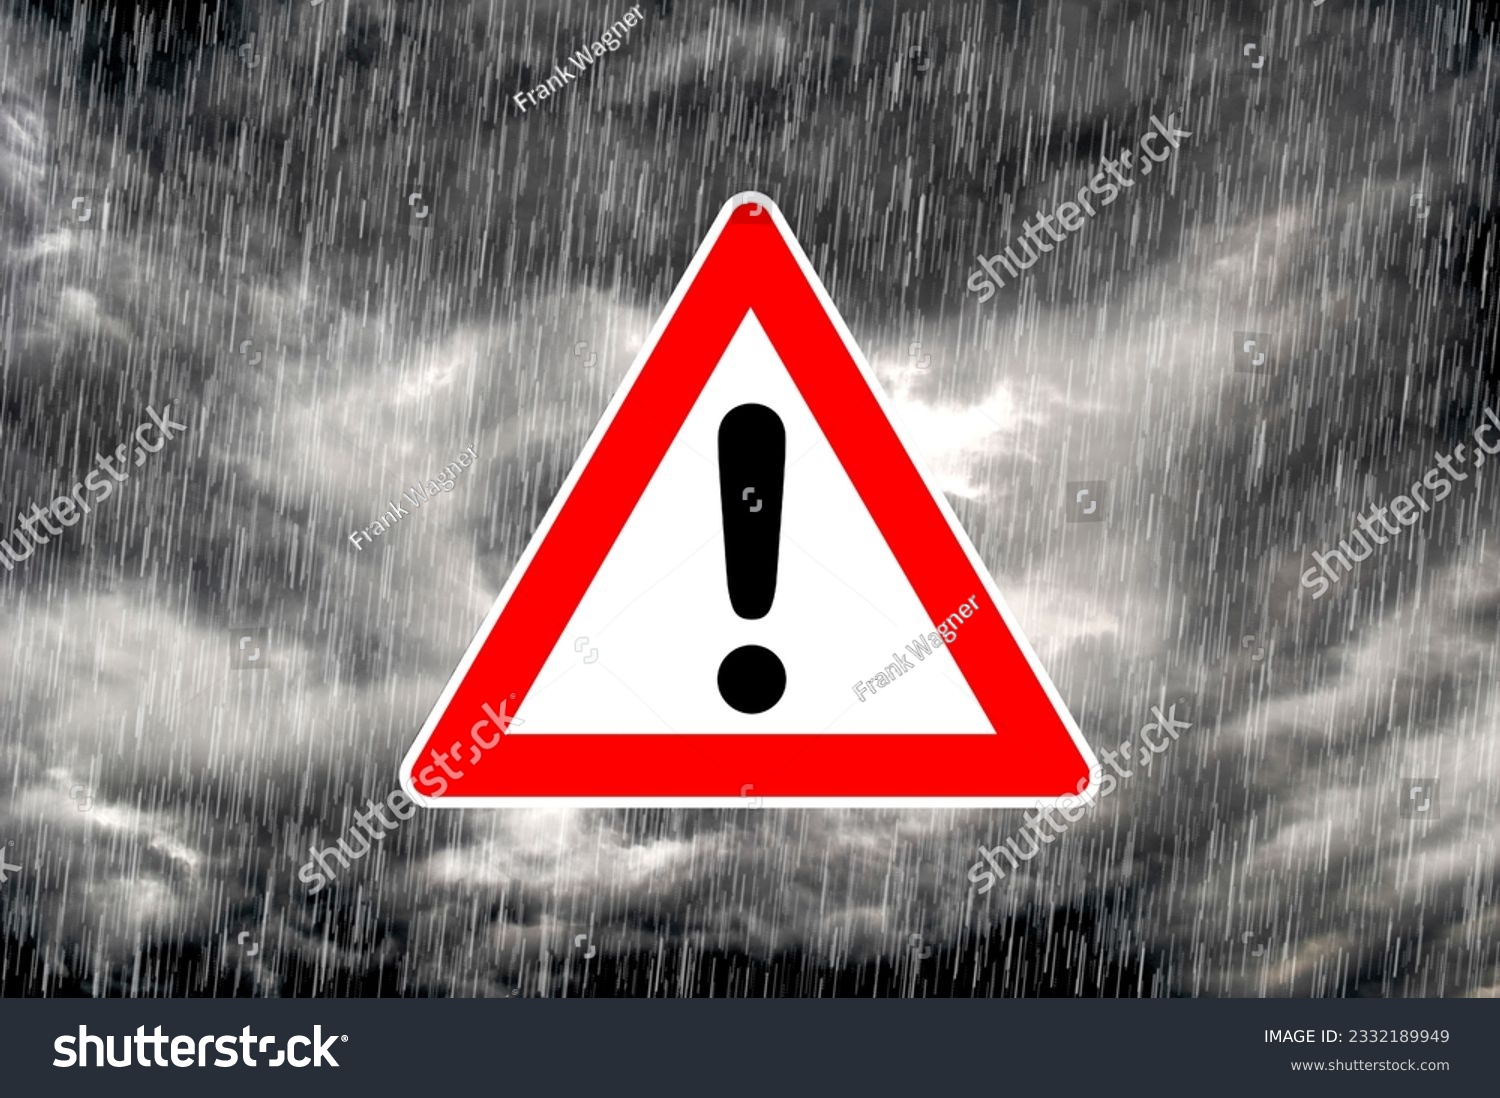 Pictogram of warning triangle with exclamation mark against dramatic under weather sky as symbol for severe weather warning #2332189949